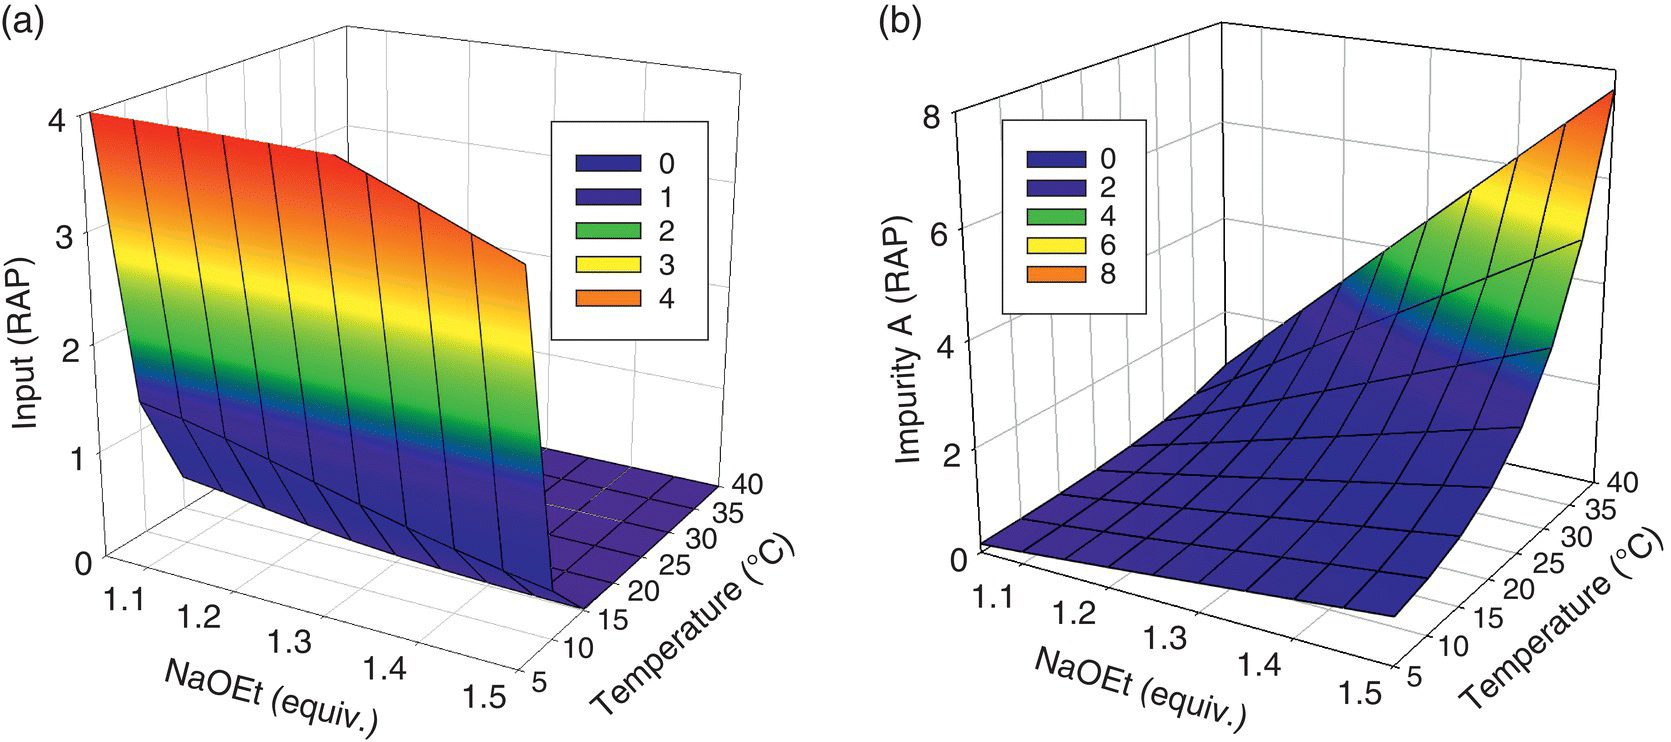 Surface graphs for (a) residual levels of input and (b) levels of Impurity having 3d structures in discrete shades representing for 0, 1, 2, 3, and 4 and 0, 2, 4, 6, and 8, respectively.